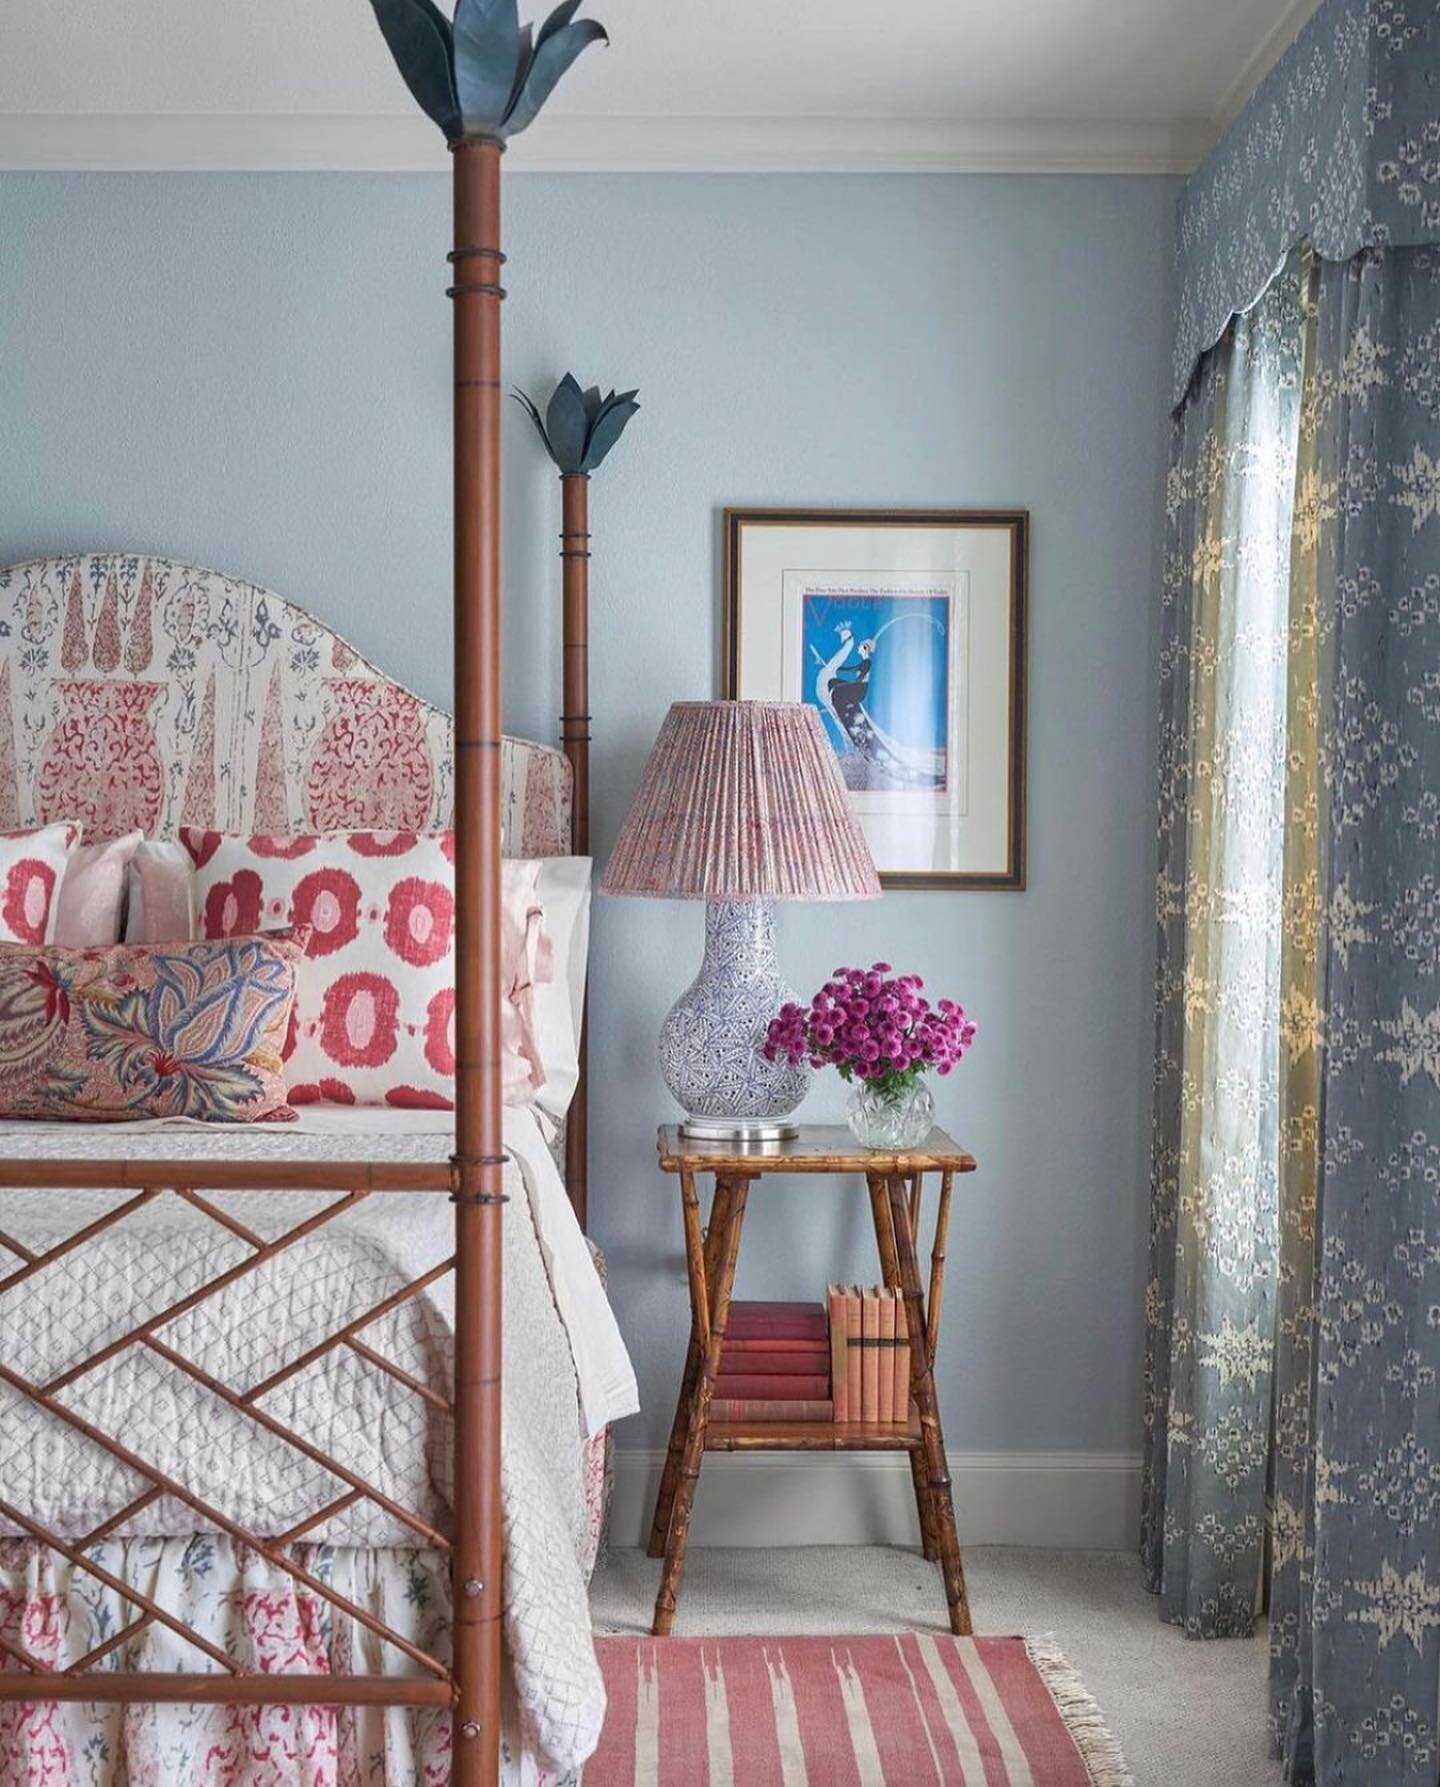 Loving the mix of patterns in this bedroom by @meredithellis ❤️ #interiordesign